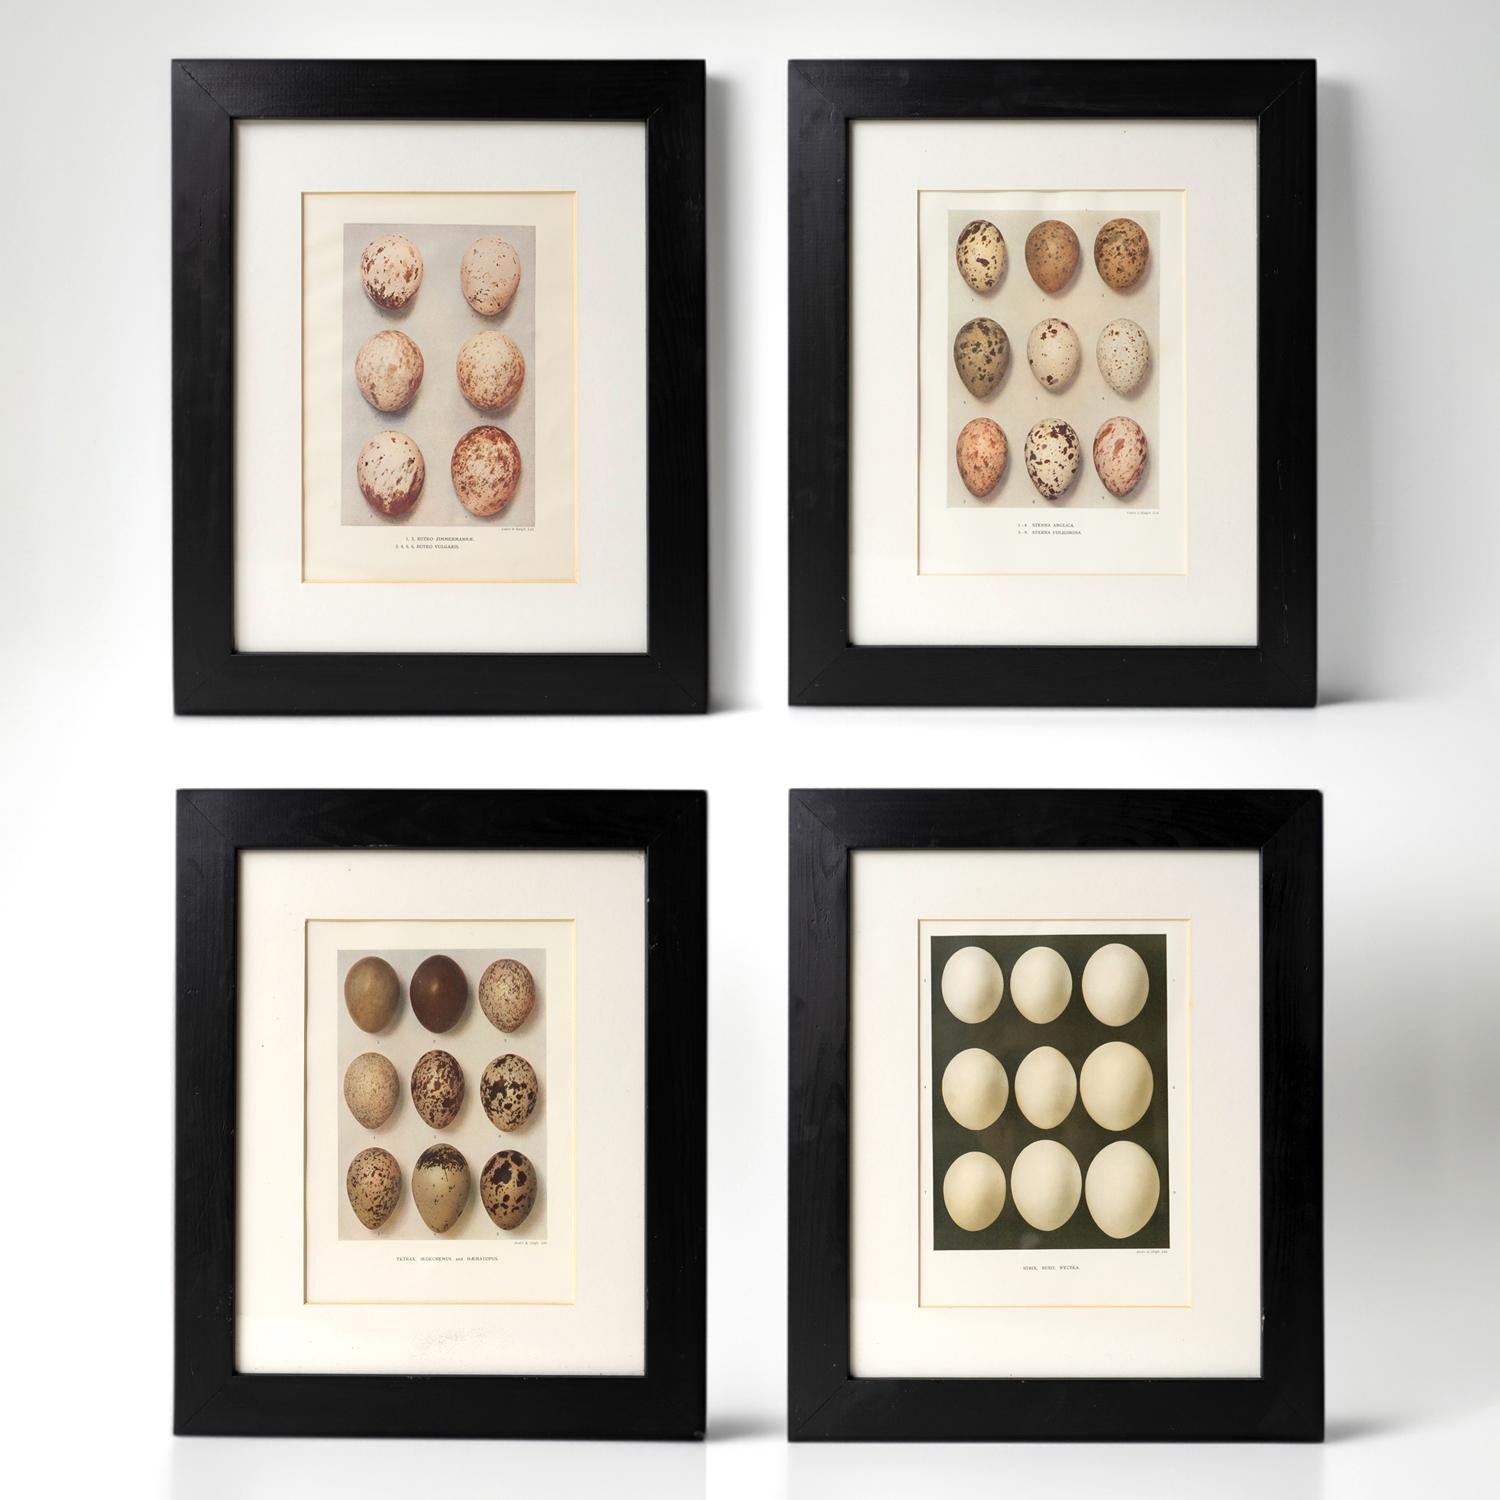 ANTIQUE FRAMED EGG PRINTS
A decorative set of egg prints depicting different bird egg specimens. 

Provenance: Previously with Christie’s South Kensington forming part of a larger set of ten selling at £1000 plus commission in 2009. 

Published by